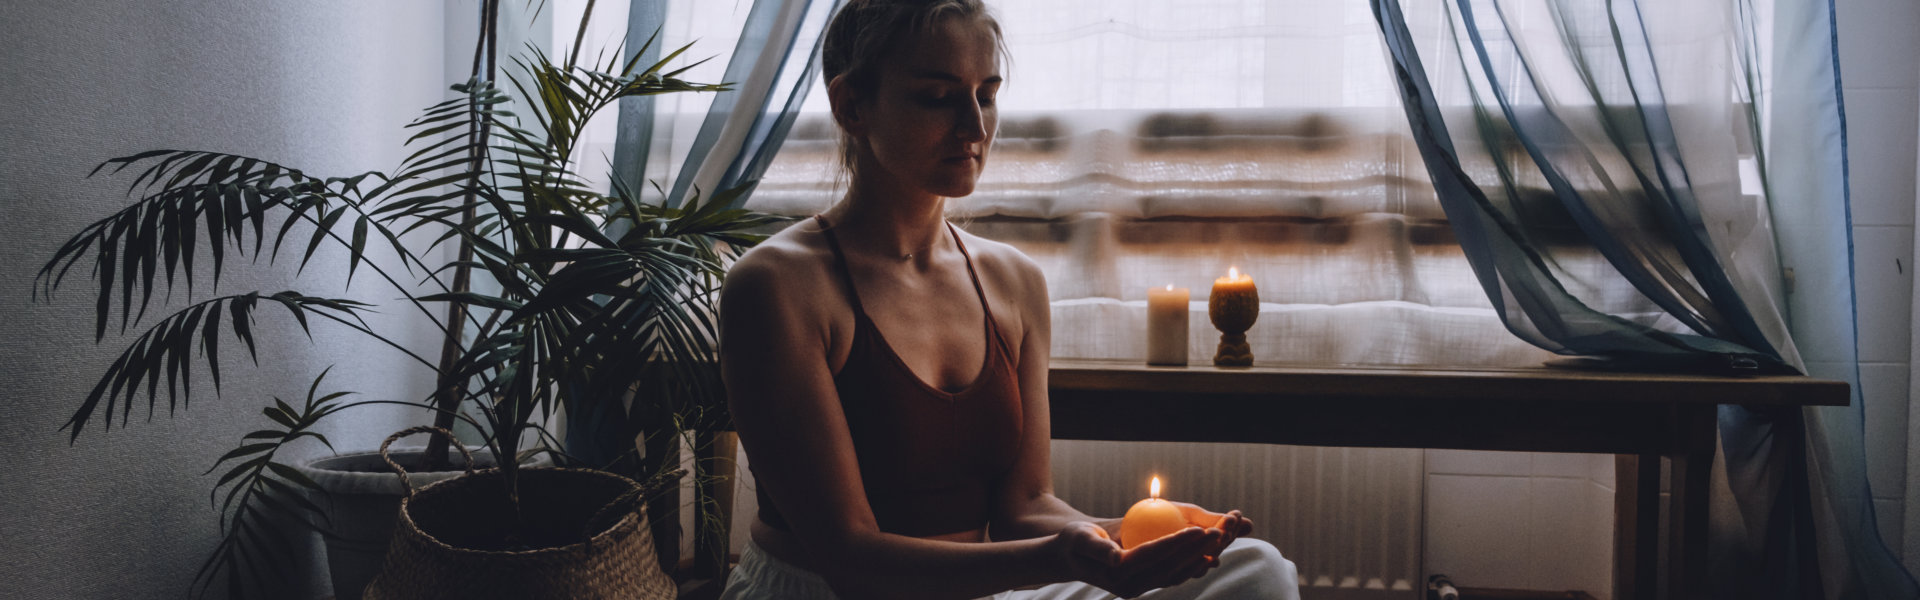 Woman meditating while holding a candle